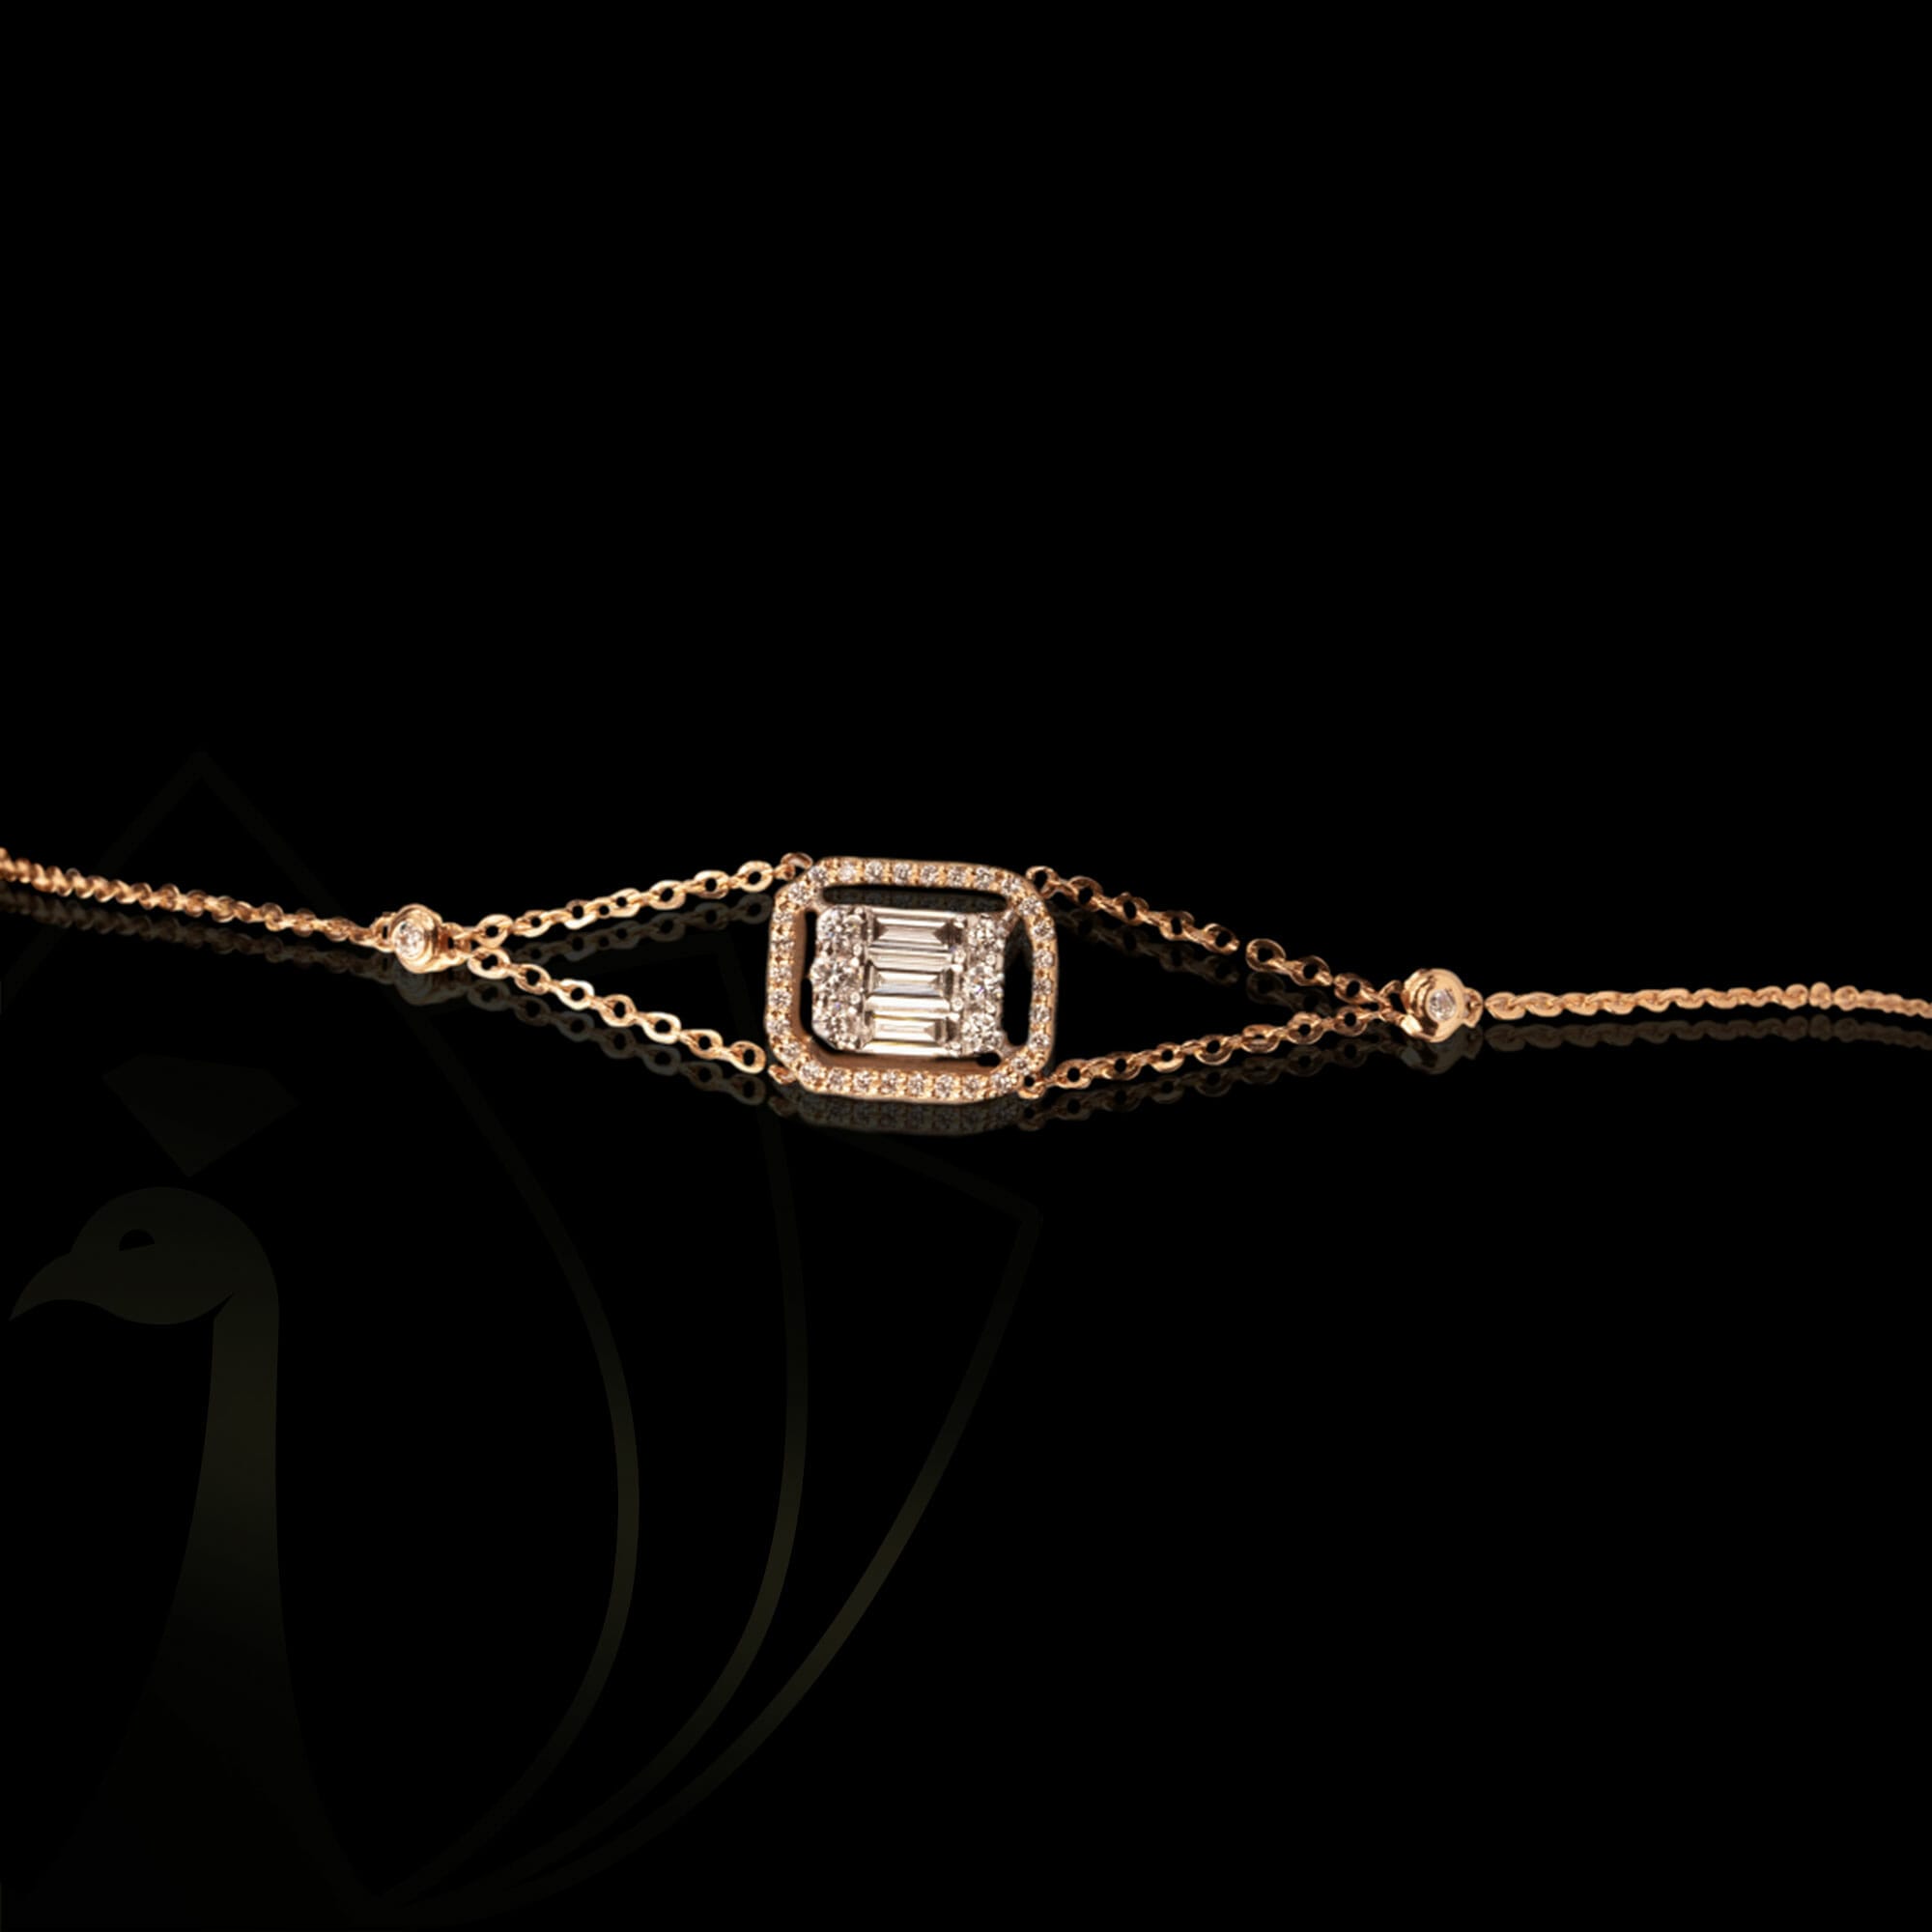 Zesty Zenith Diamond Bracelet from our exclusive Gulz Collection